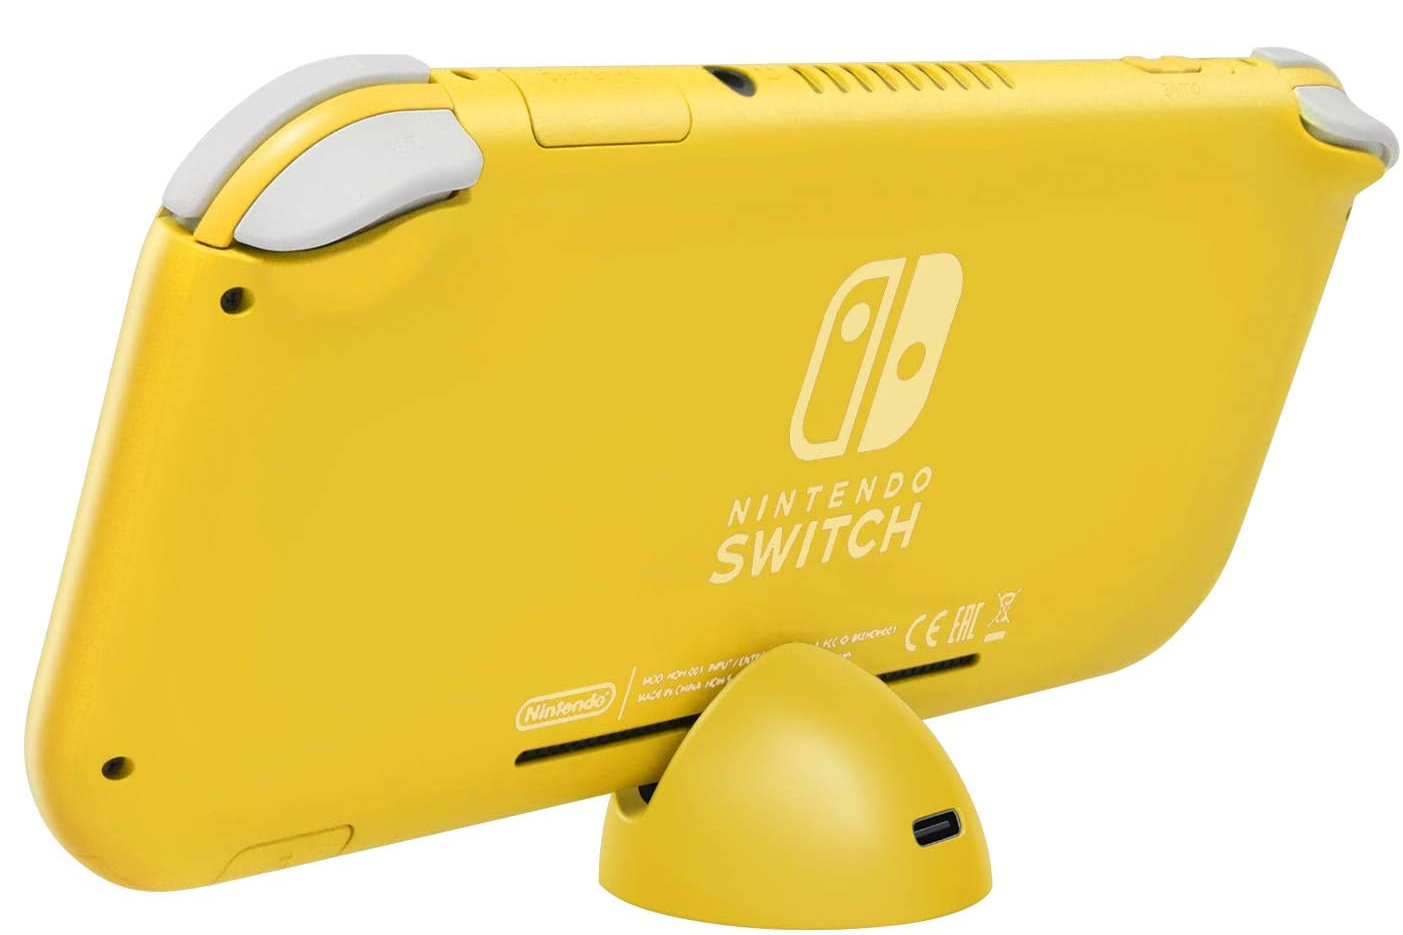 Back view of a yellow Meneea Switch Lite Docking Station.